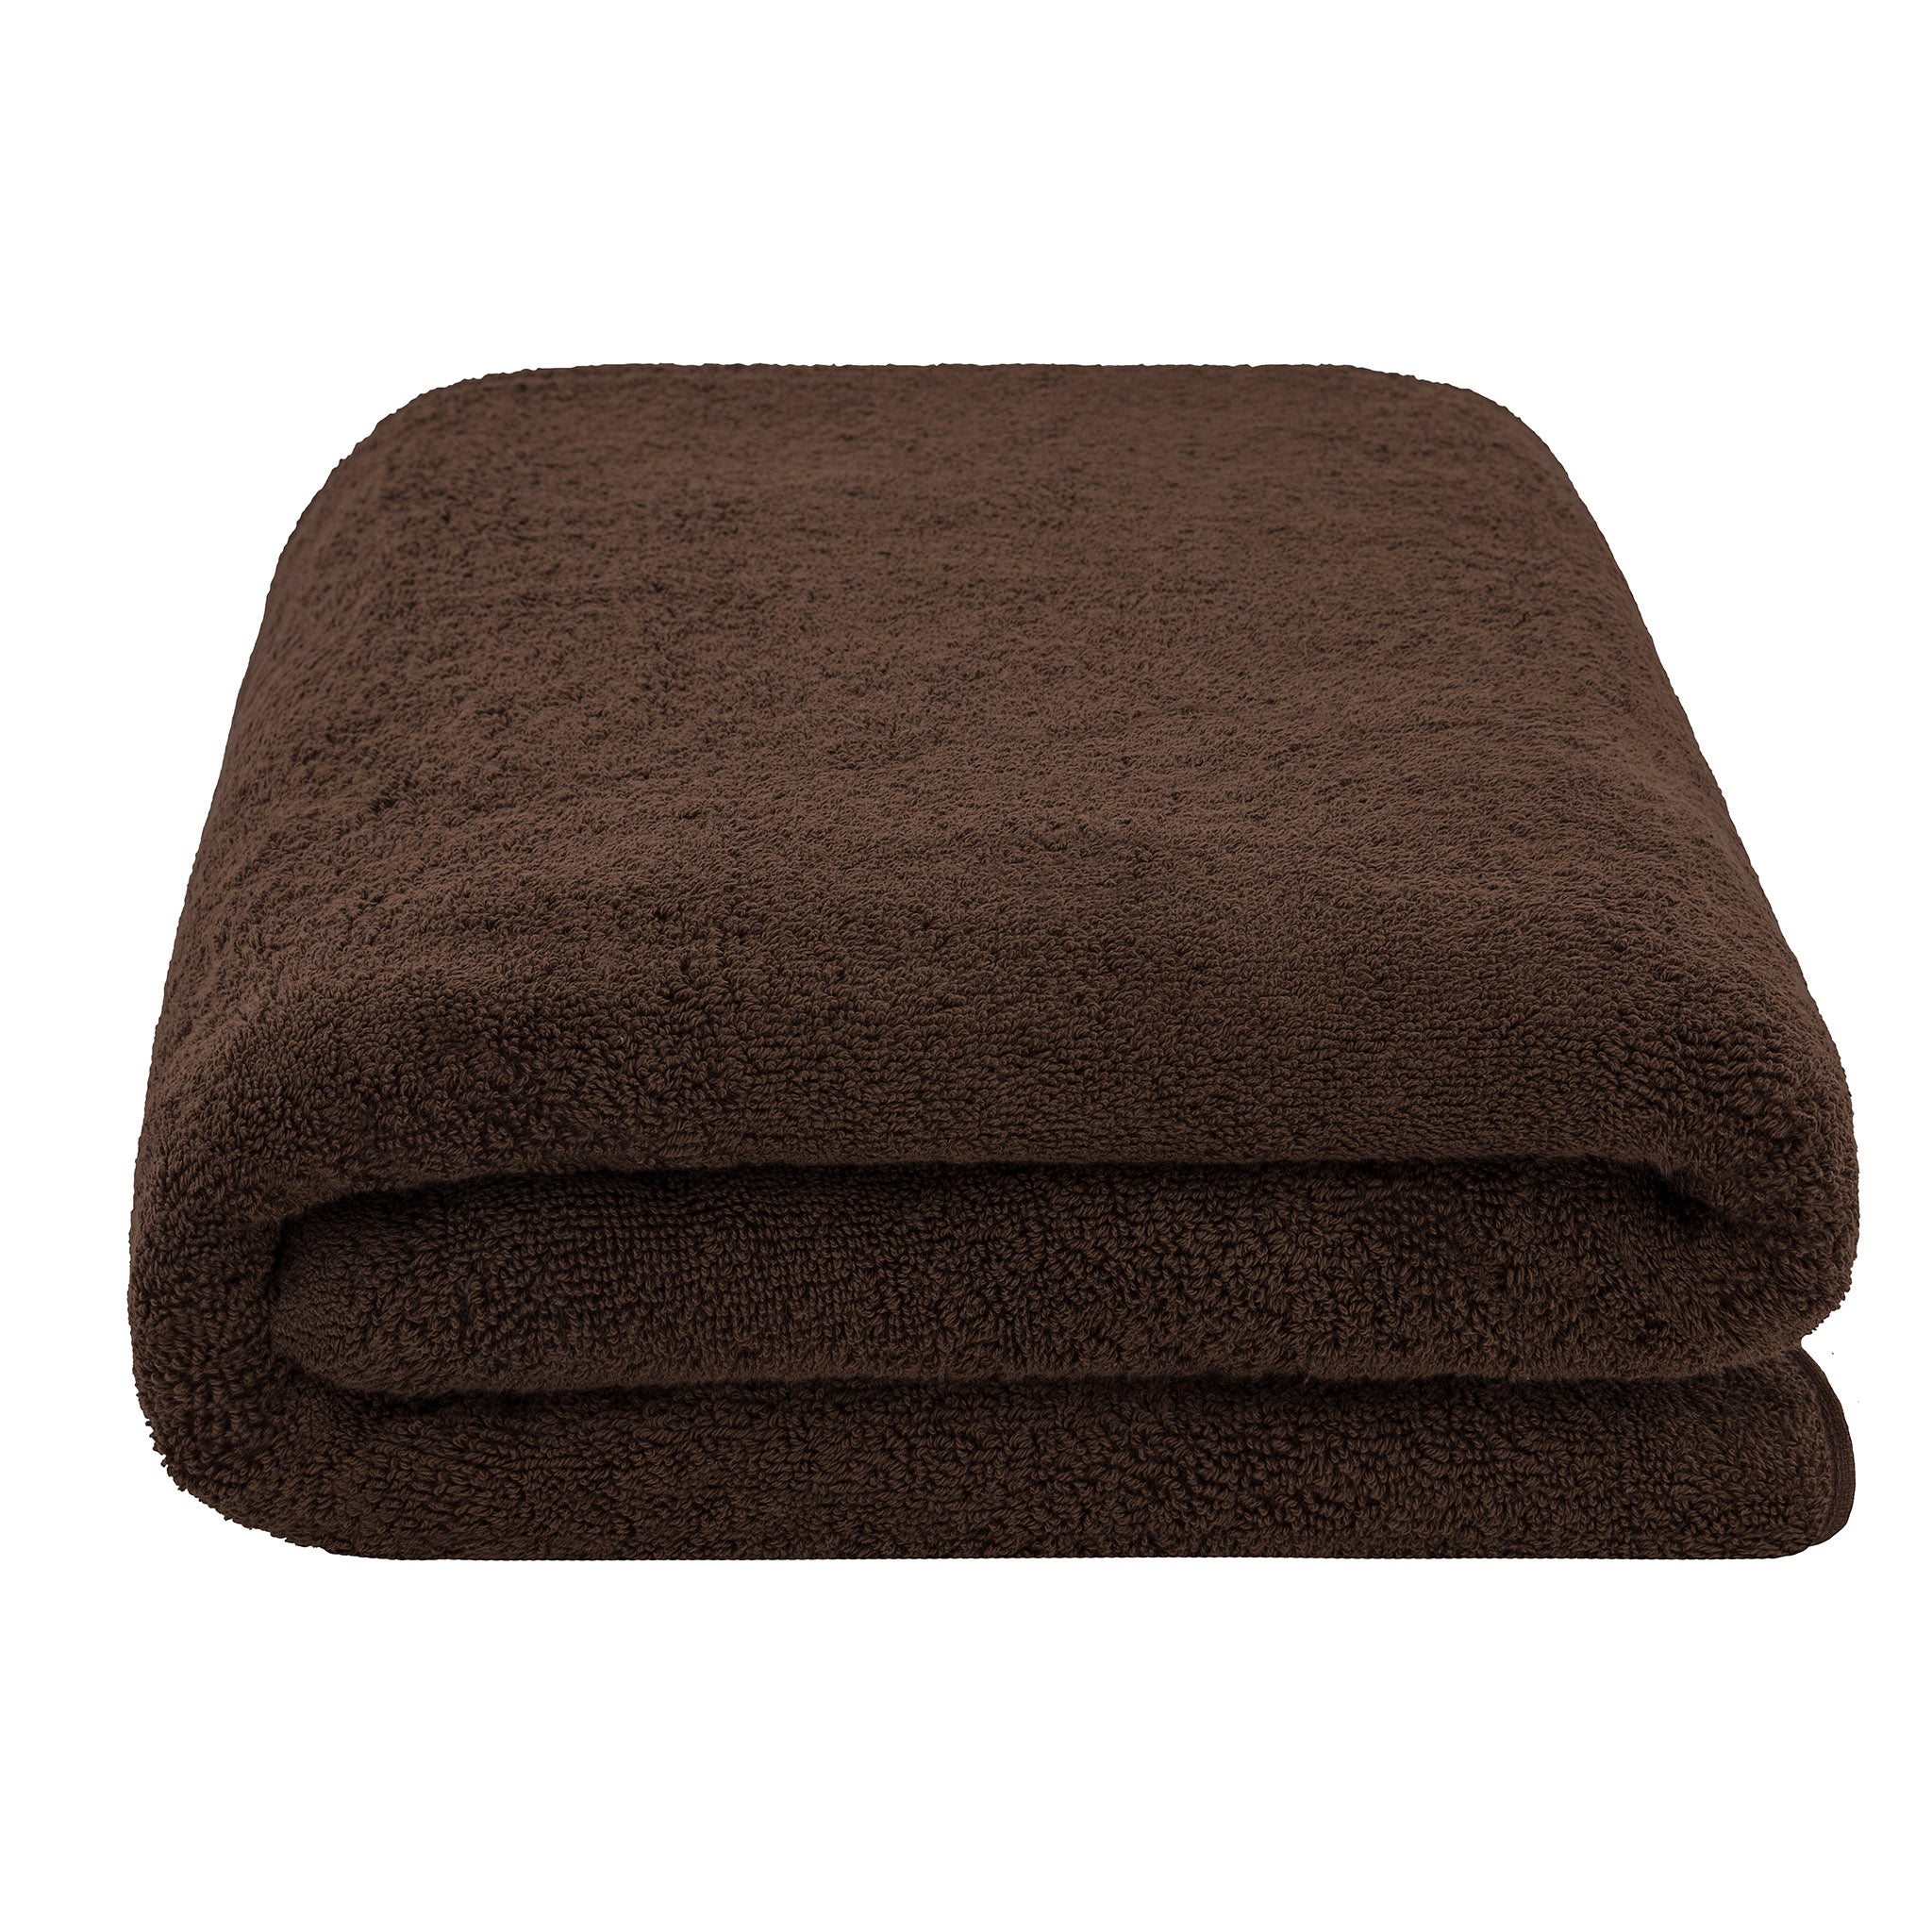 American Soft Linen 100% Ring Spun Cotton 40x80 Inches Oversized Bath Sheets chocolate-brown-3